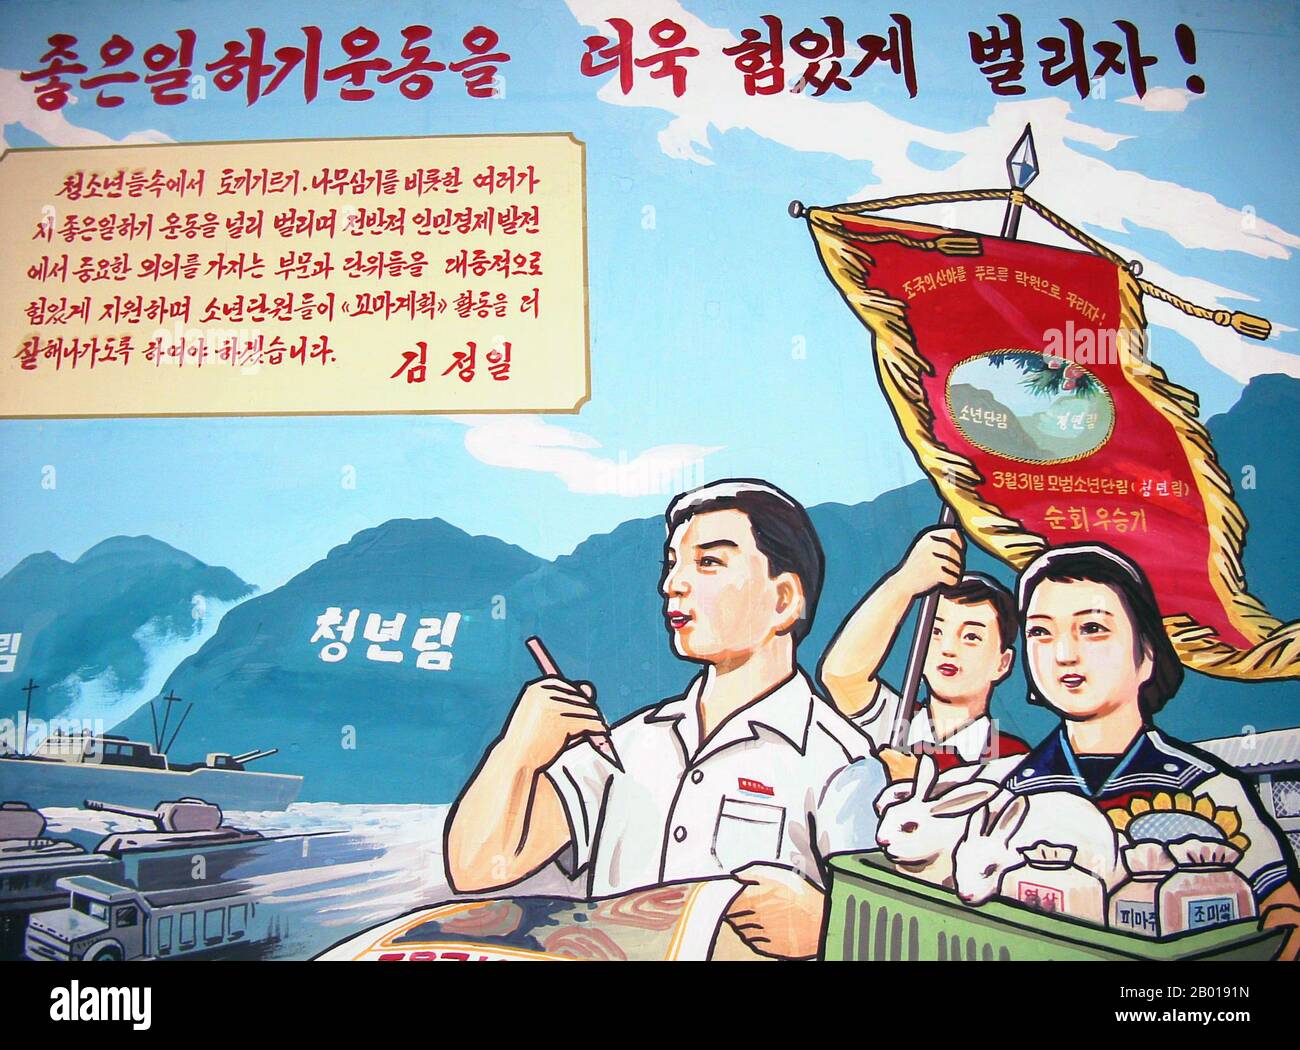 Korea: North Korean (DPRK) propaganda fresco promoting education and production, c. 1950s-1960s.  Socialist Realism is a style of realistic art which developed under Socialism in the Soviet Union and became a dominant style in other communist countries. Socialist Realism is a teleologically-oriented style having as its purpose the furtherance of the goals of socialism and communism. Although related, it should not be confused with Social Realism, a type of art that realistically depicts subjects of social concern. Socialist Realism generally glorifies the ideology of the communist state. Stock Photo